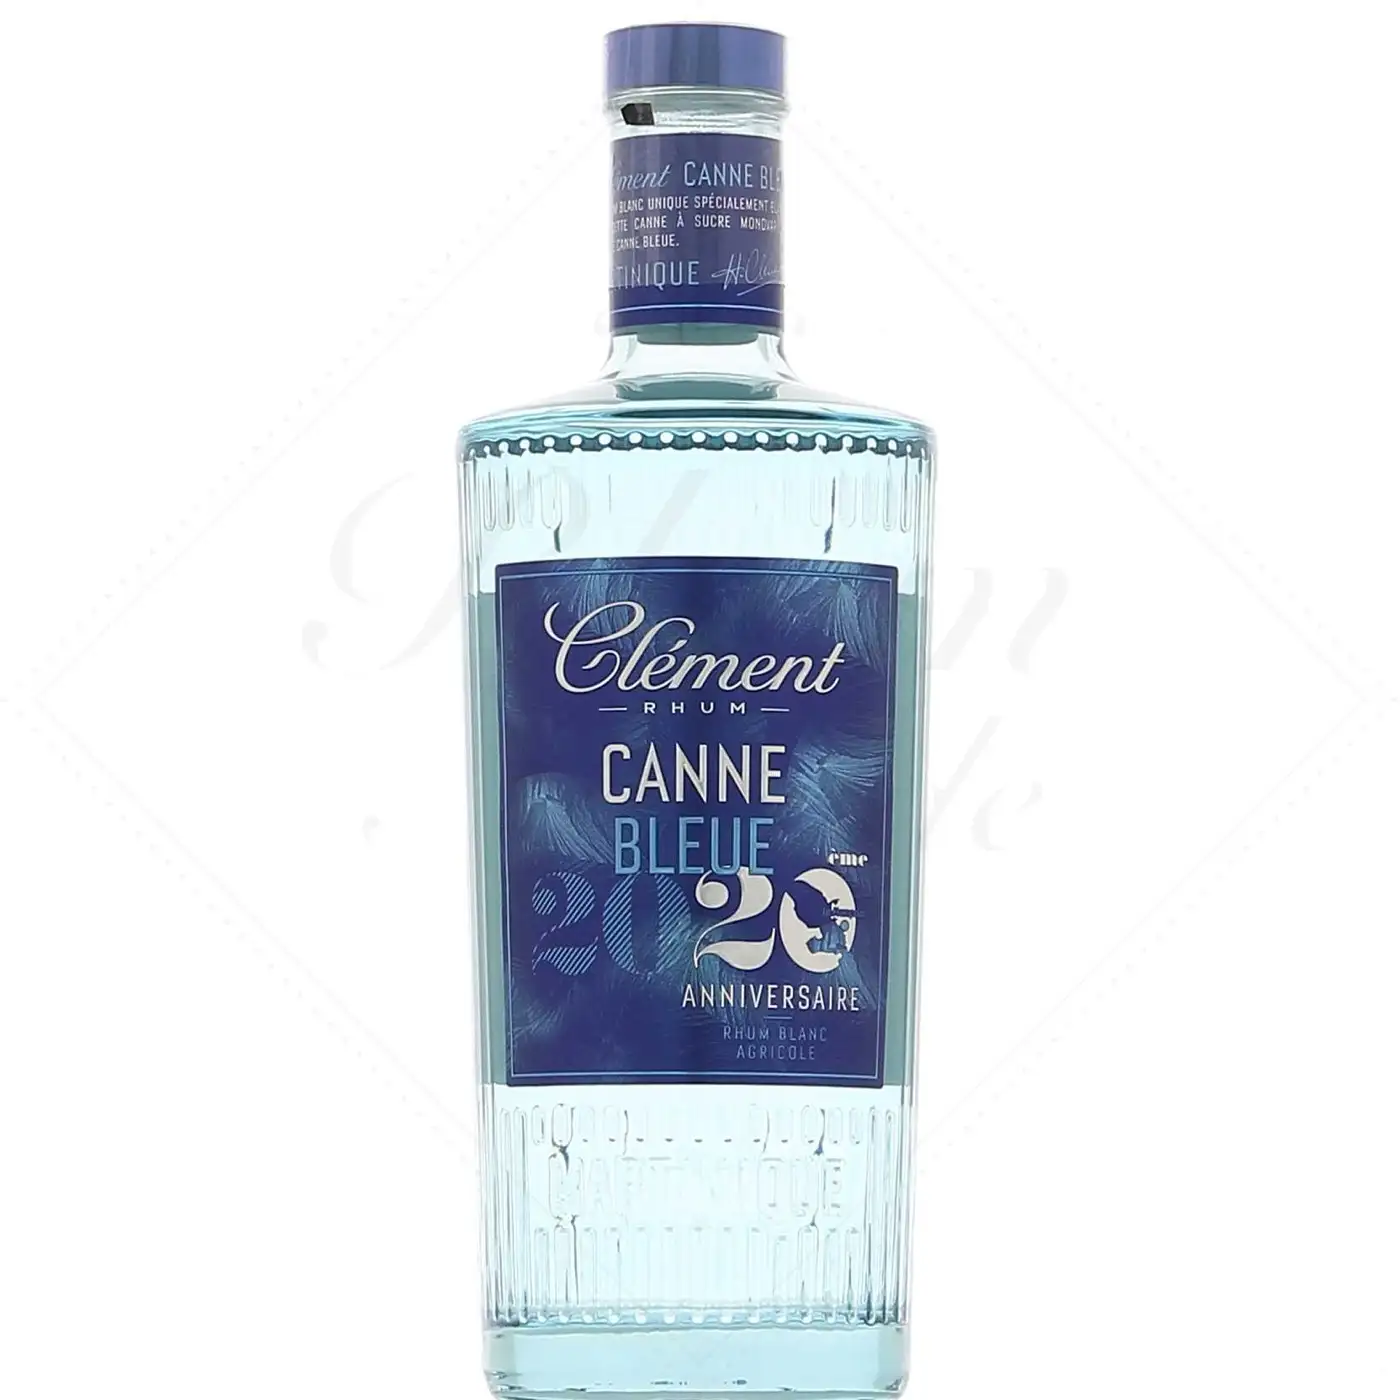 Image of the front of the bottle of the rum Clément Canne Bleue